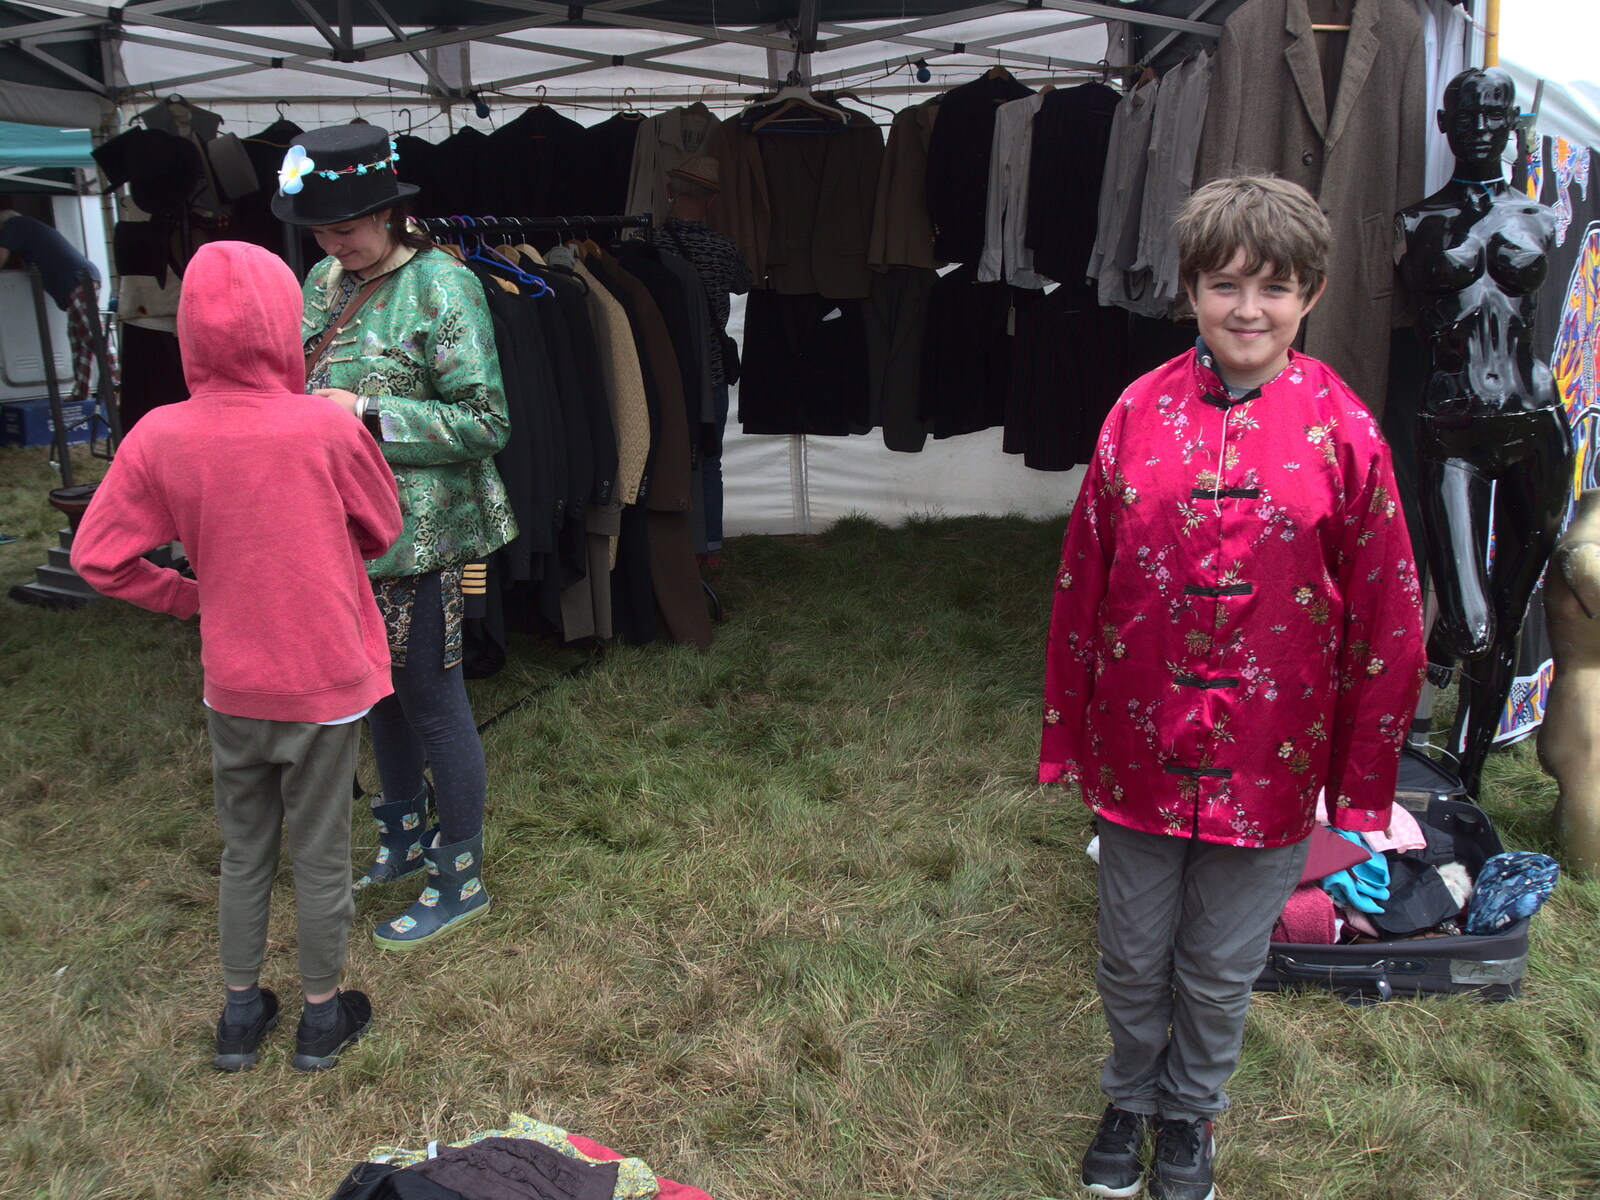 Fred tries on a Chinese shirt from Maui Waui Festival, Hill Farm, Gressenhall, Norfolk - 28th August 2021